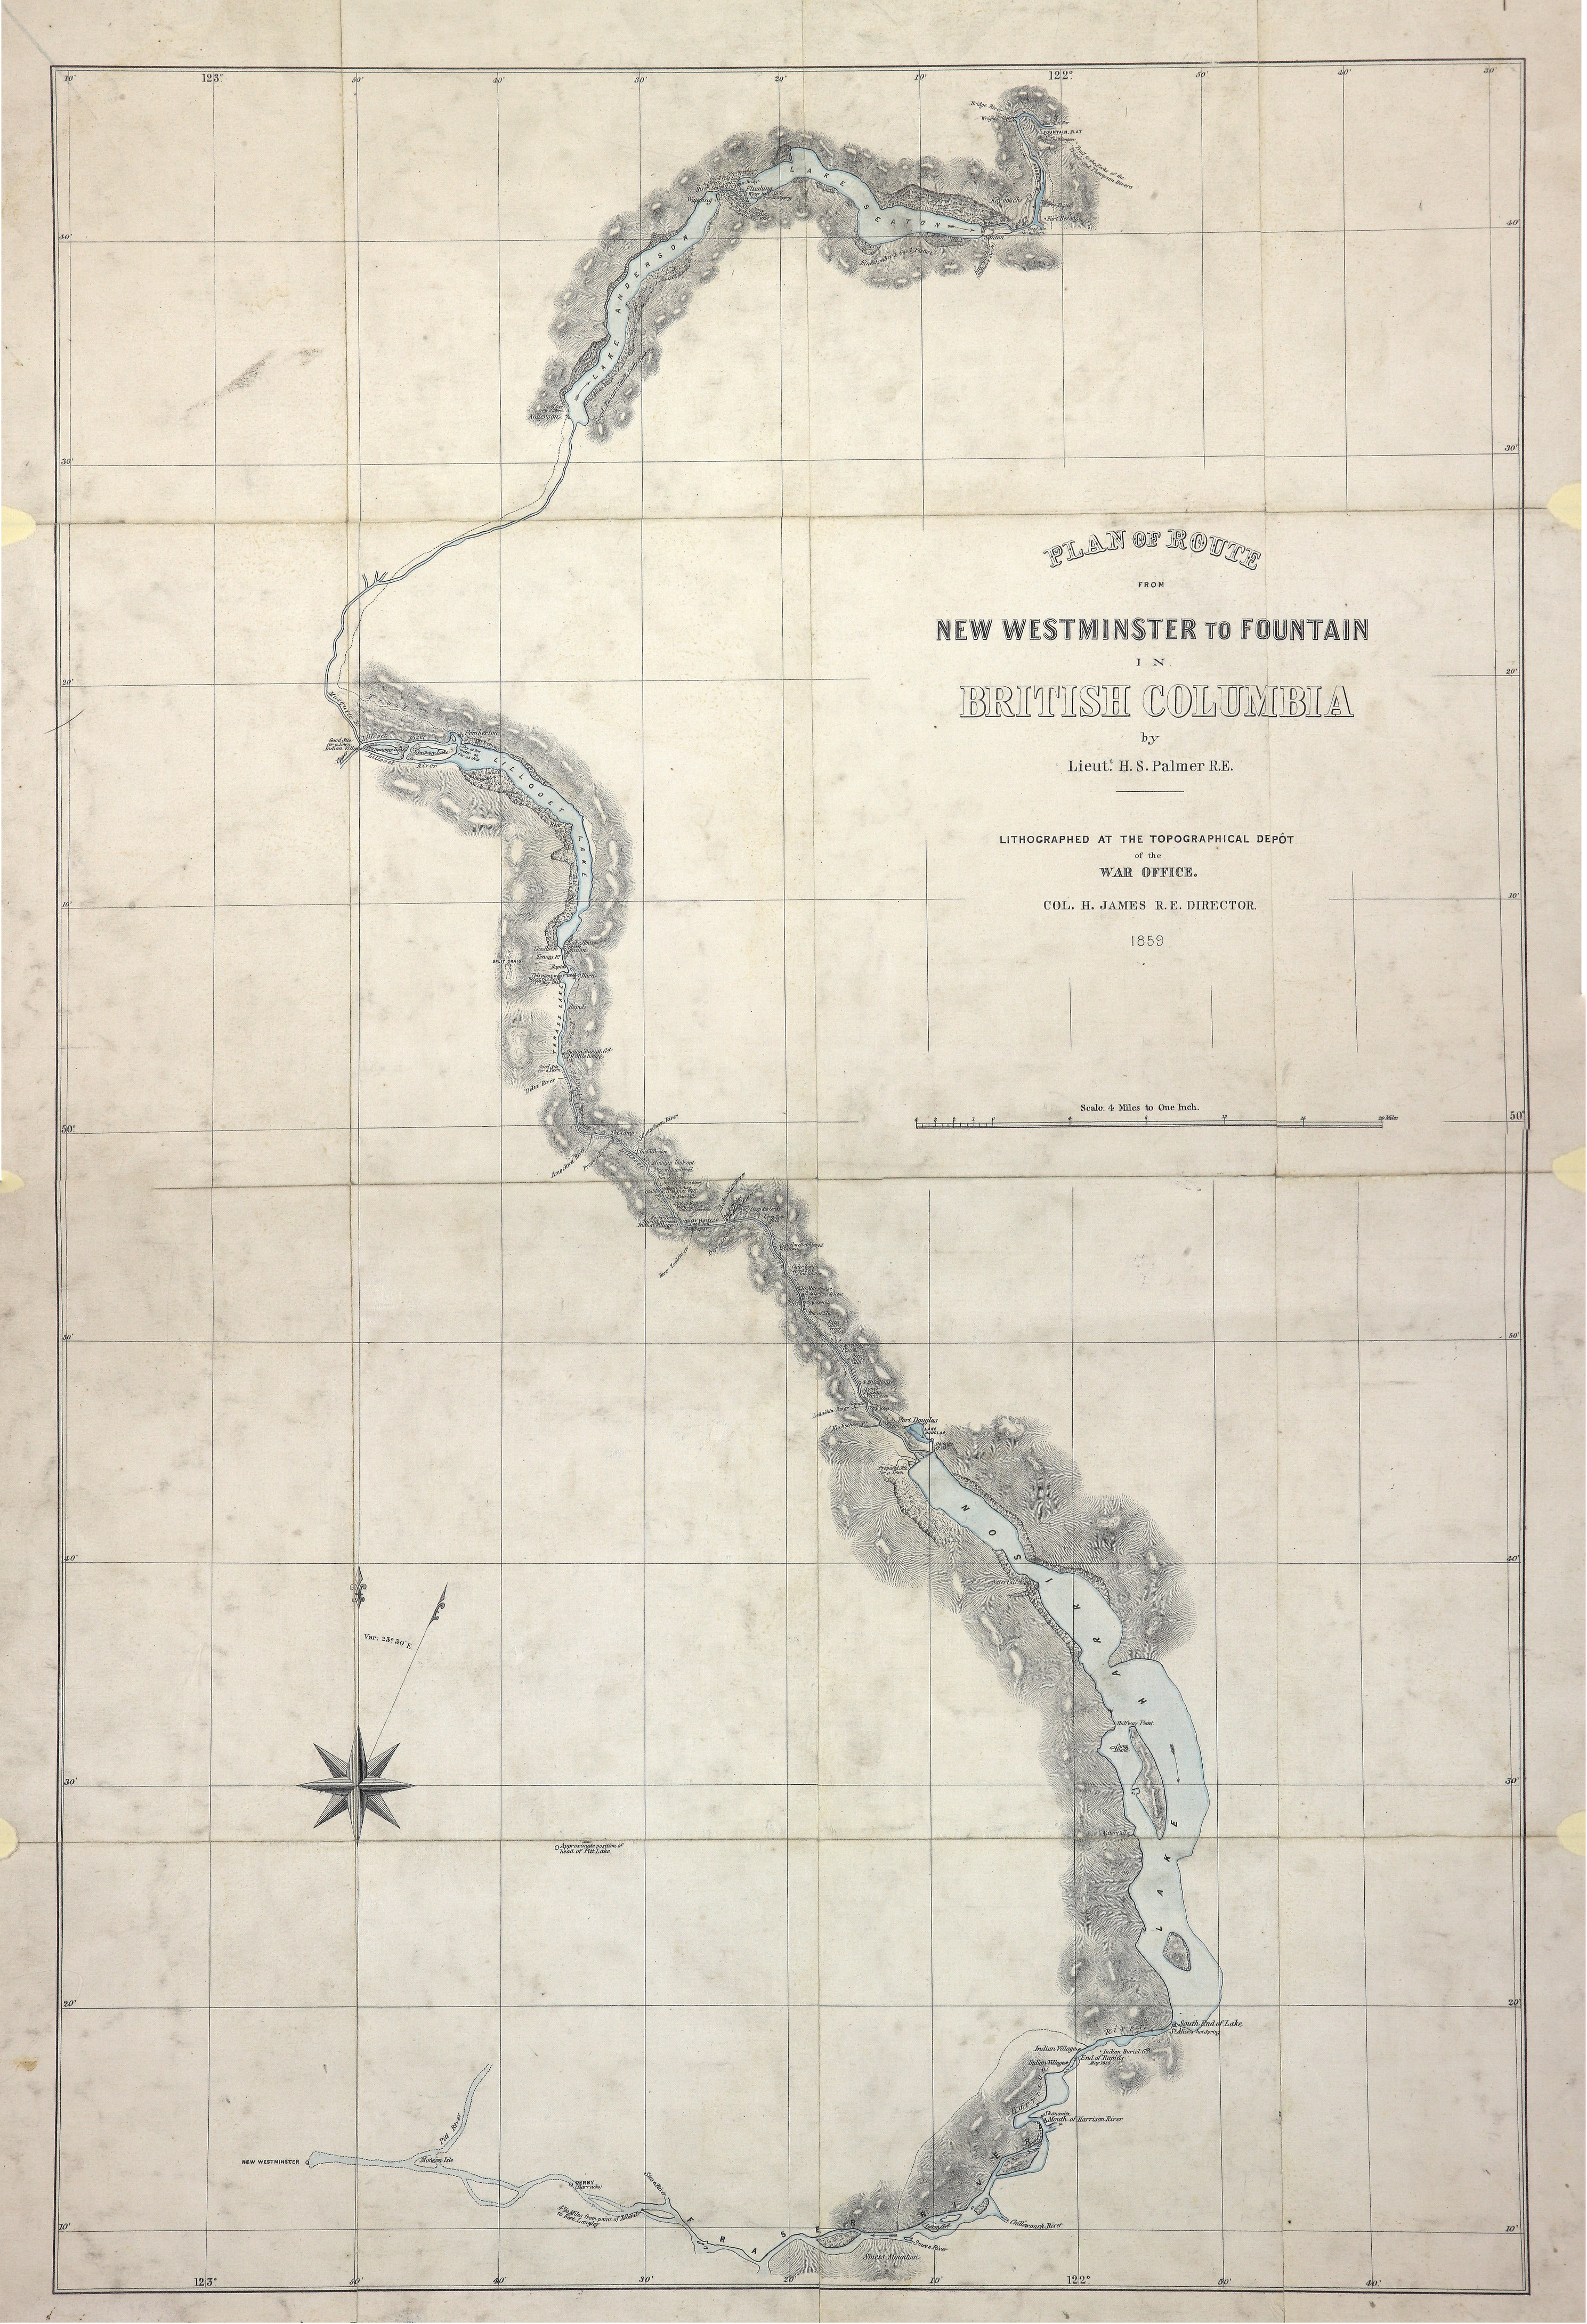 Plan of Route from New Westminster to Fountain in British Columbia, by Lieut. H. S. Palmer, R.E., 1859. 4 miles to 1 inch. Author, Publisher, &c.: War Office, London. [British Columbia, 1859]